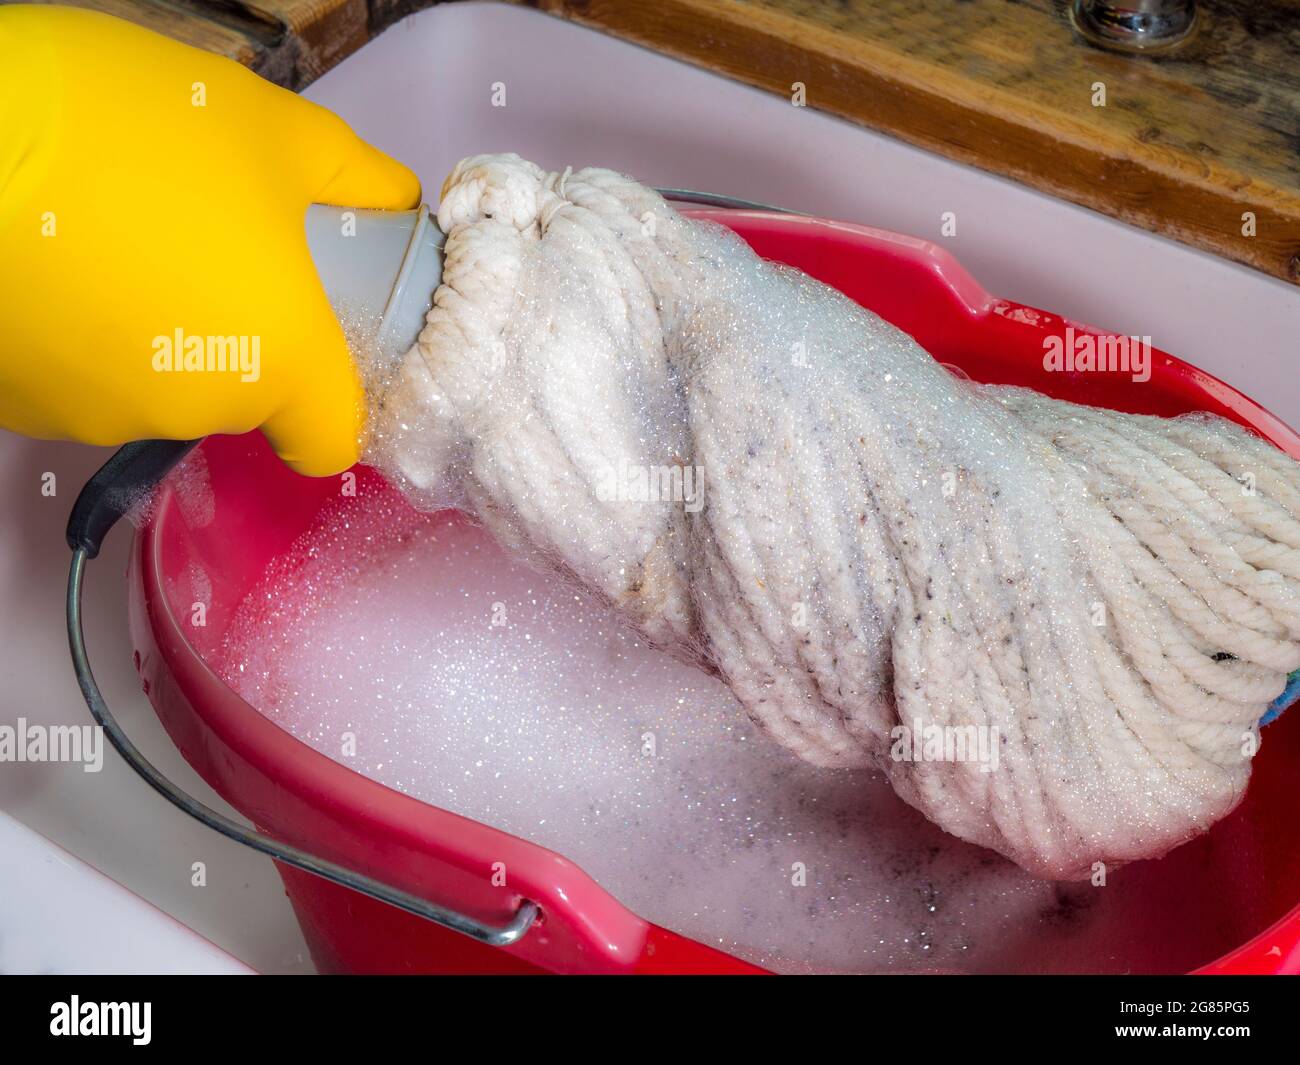 Closeup POV overhead shot of a hand in a yellow rubber glove twisting a mop over a red plastic bucket in a sink, to squeeze out soapy water. Stock Photo